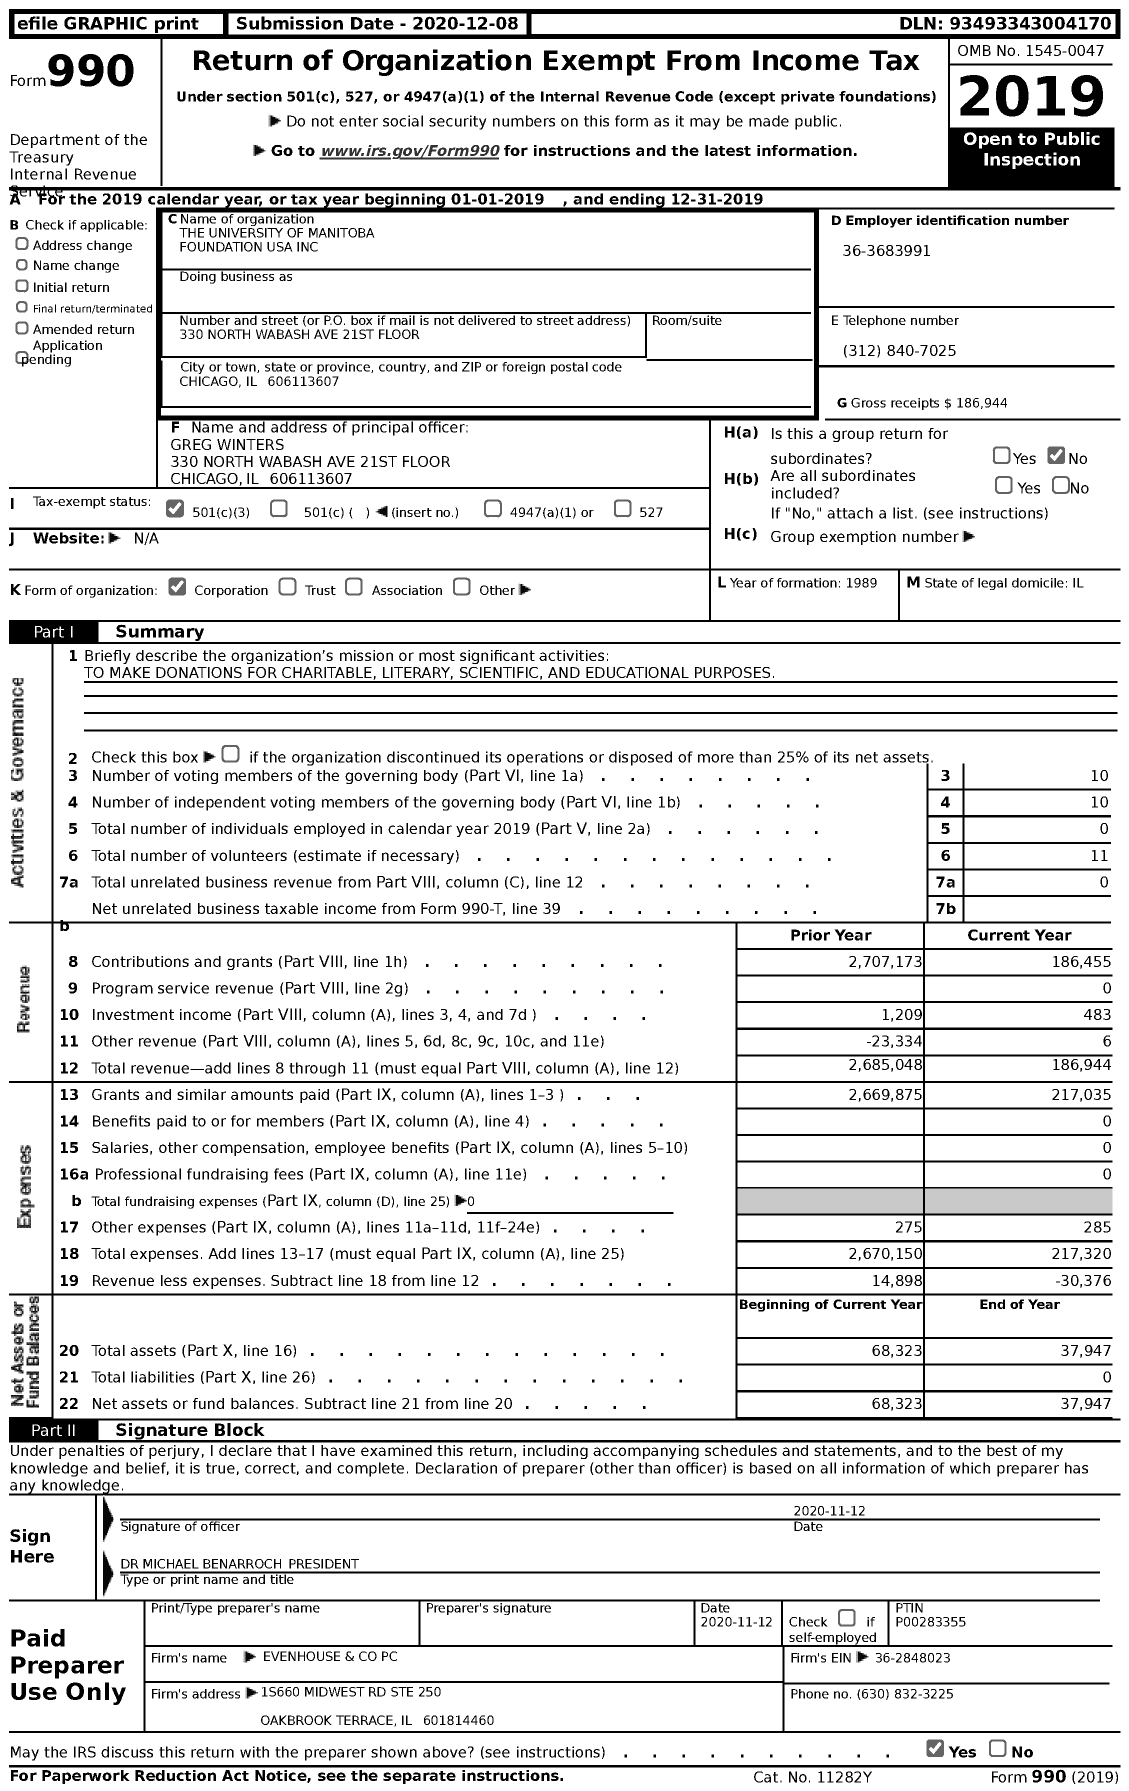 Image of first page of 2019 Form 990 for The University of Manitoba Foundation USA